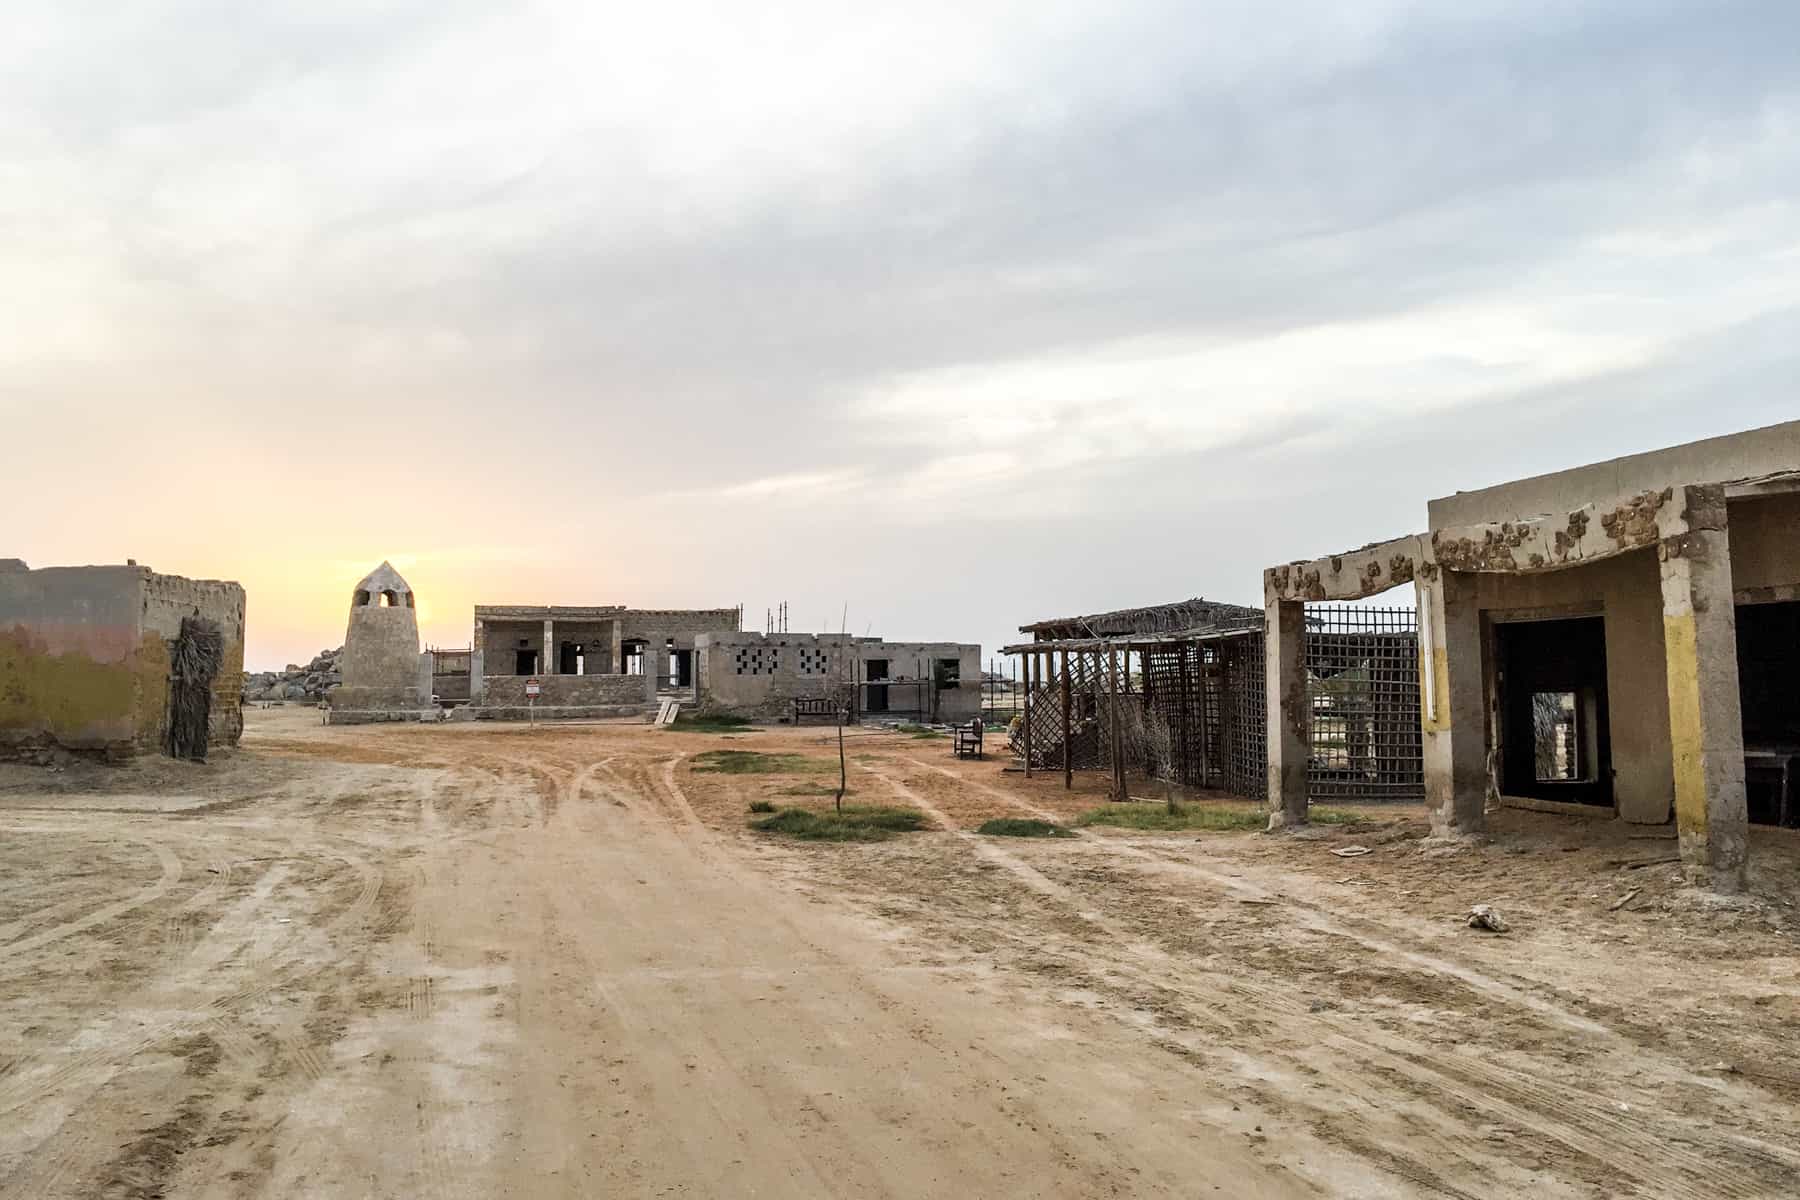 A far few of the abandoned buildings of Al Jazirat Al Hamra village in Ras Al Khaimah. A ghost city with shells of buildings left in the desert sands. 